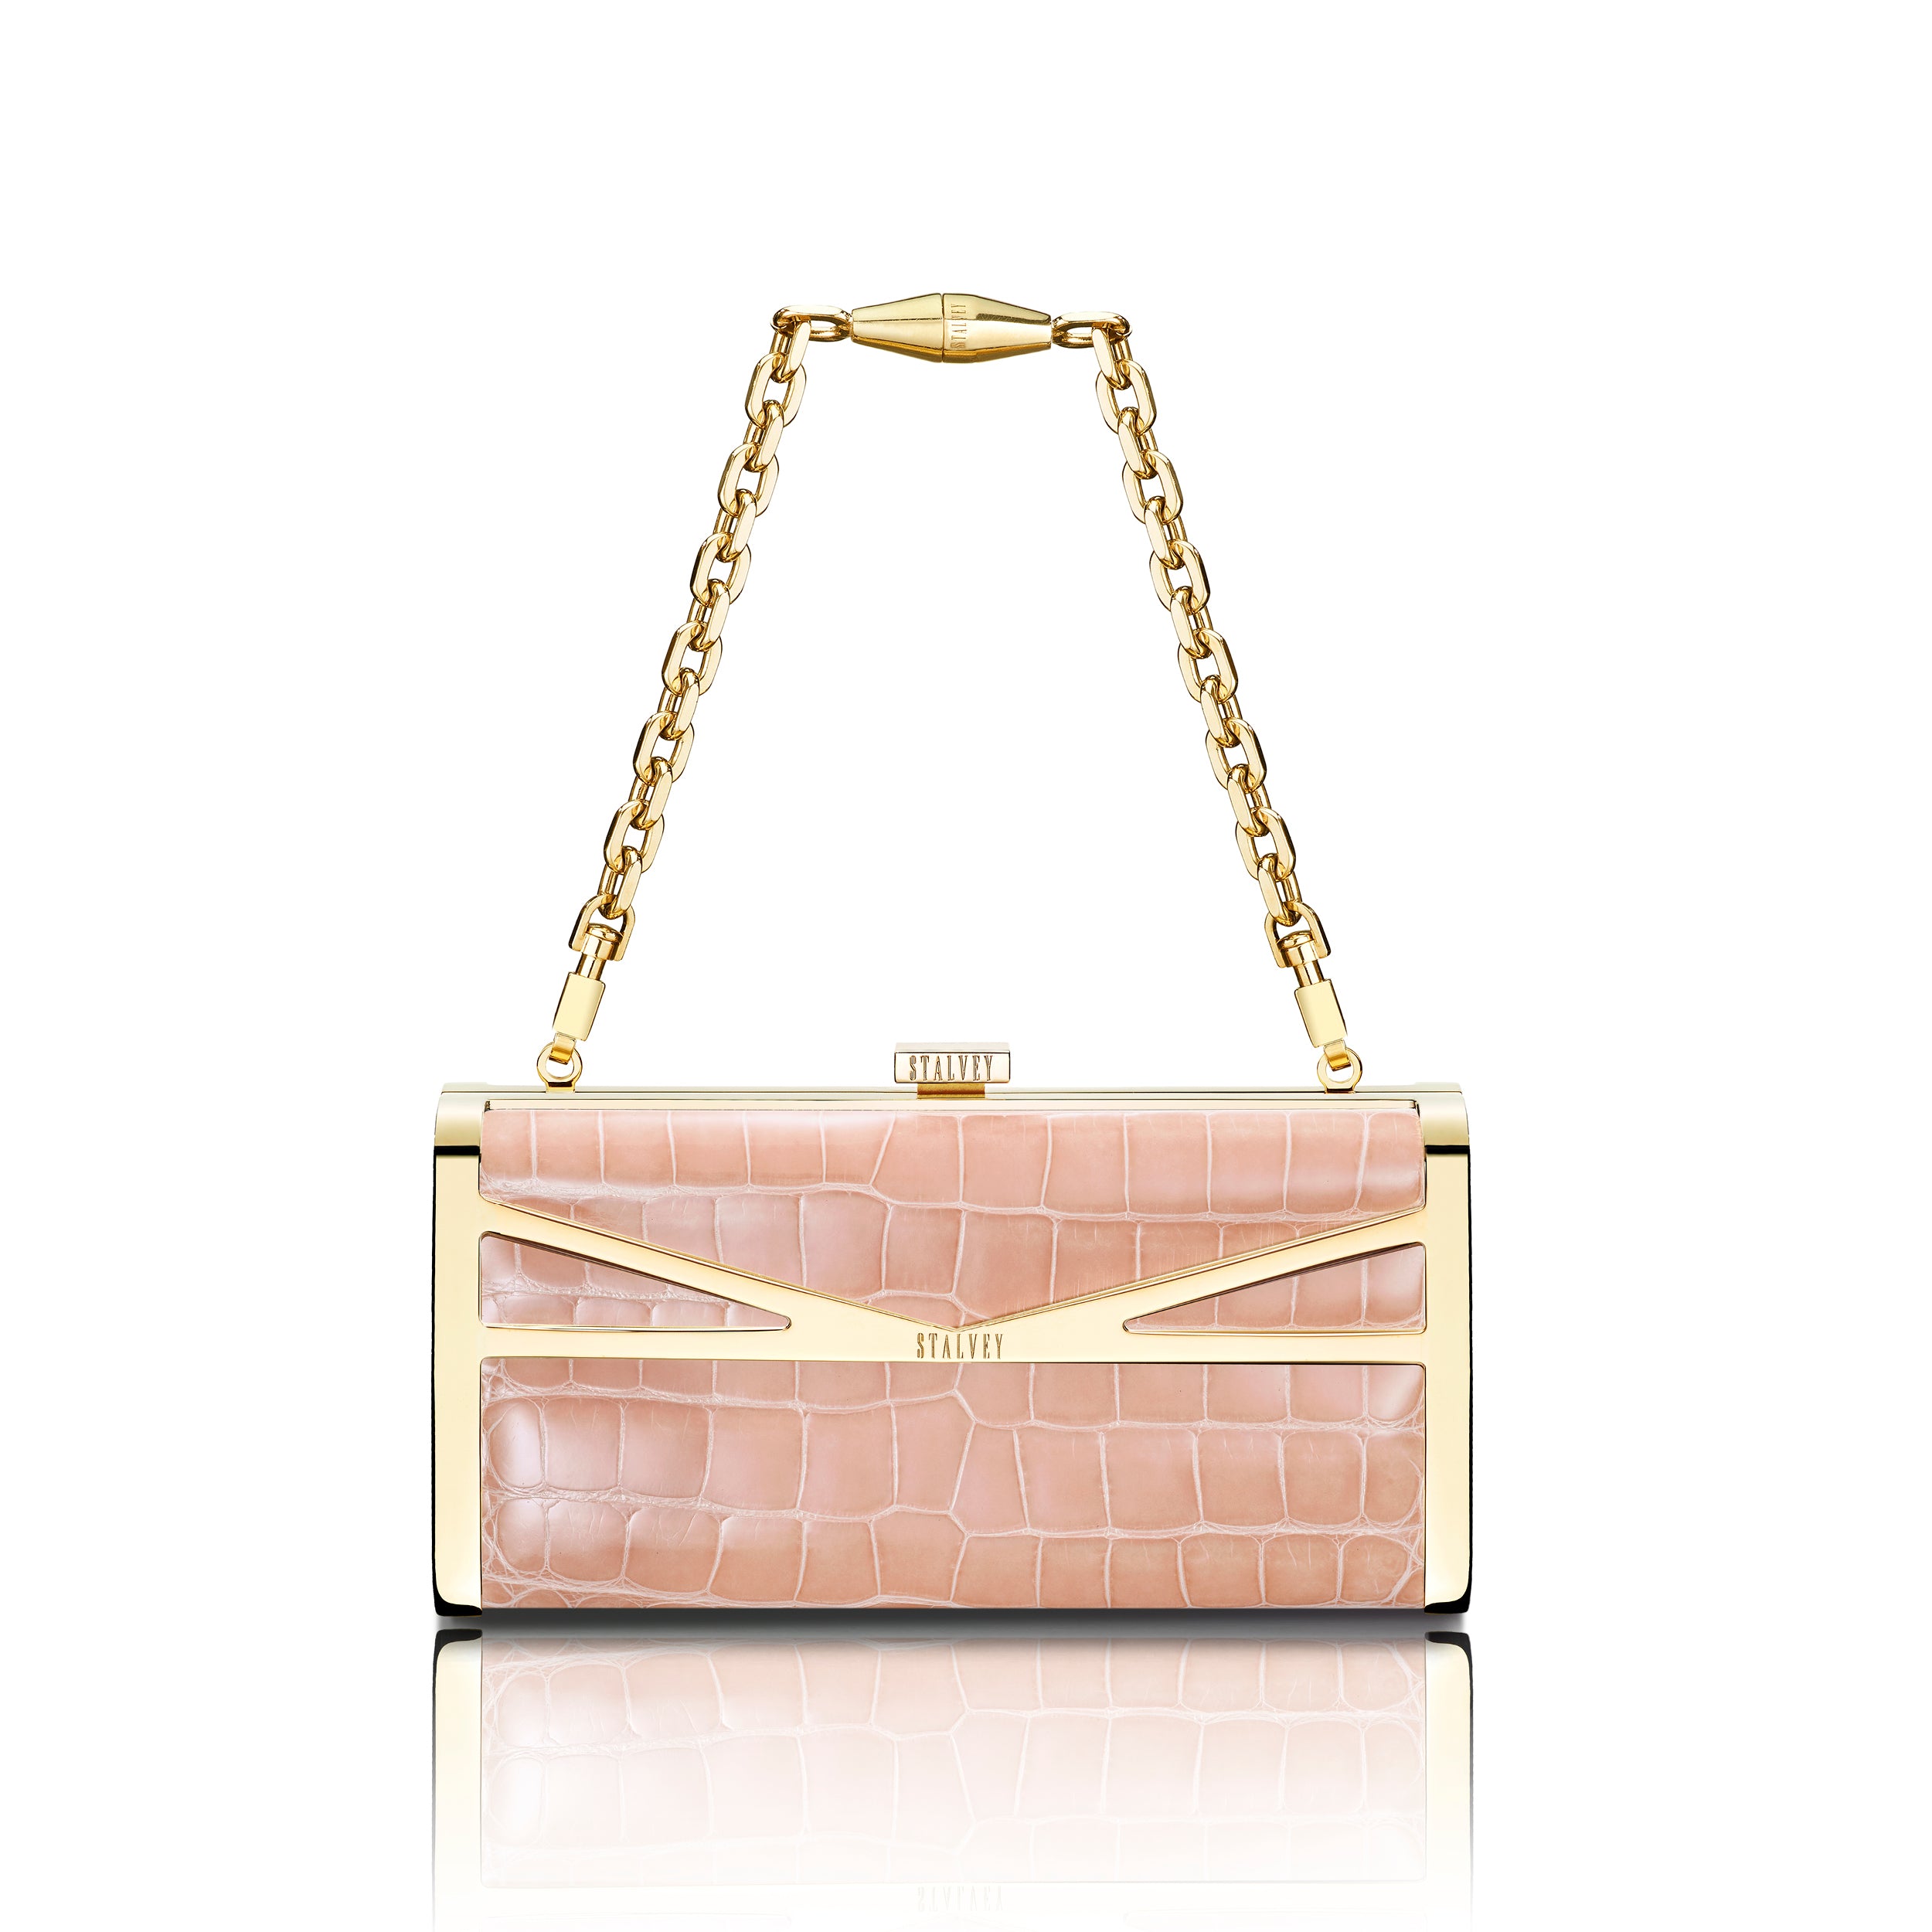 STALVEY Square Clutch in Powder Pink Alligator with 24kt Gold Hardware Front View with Chain